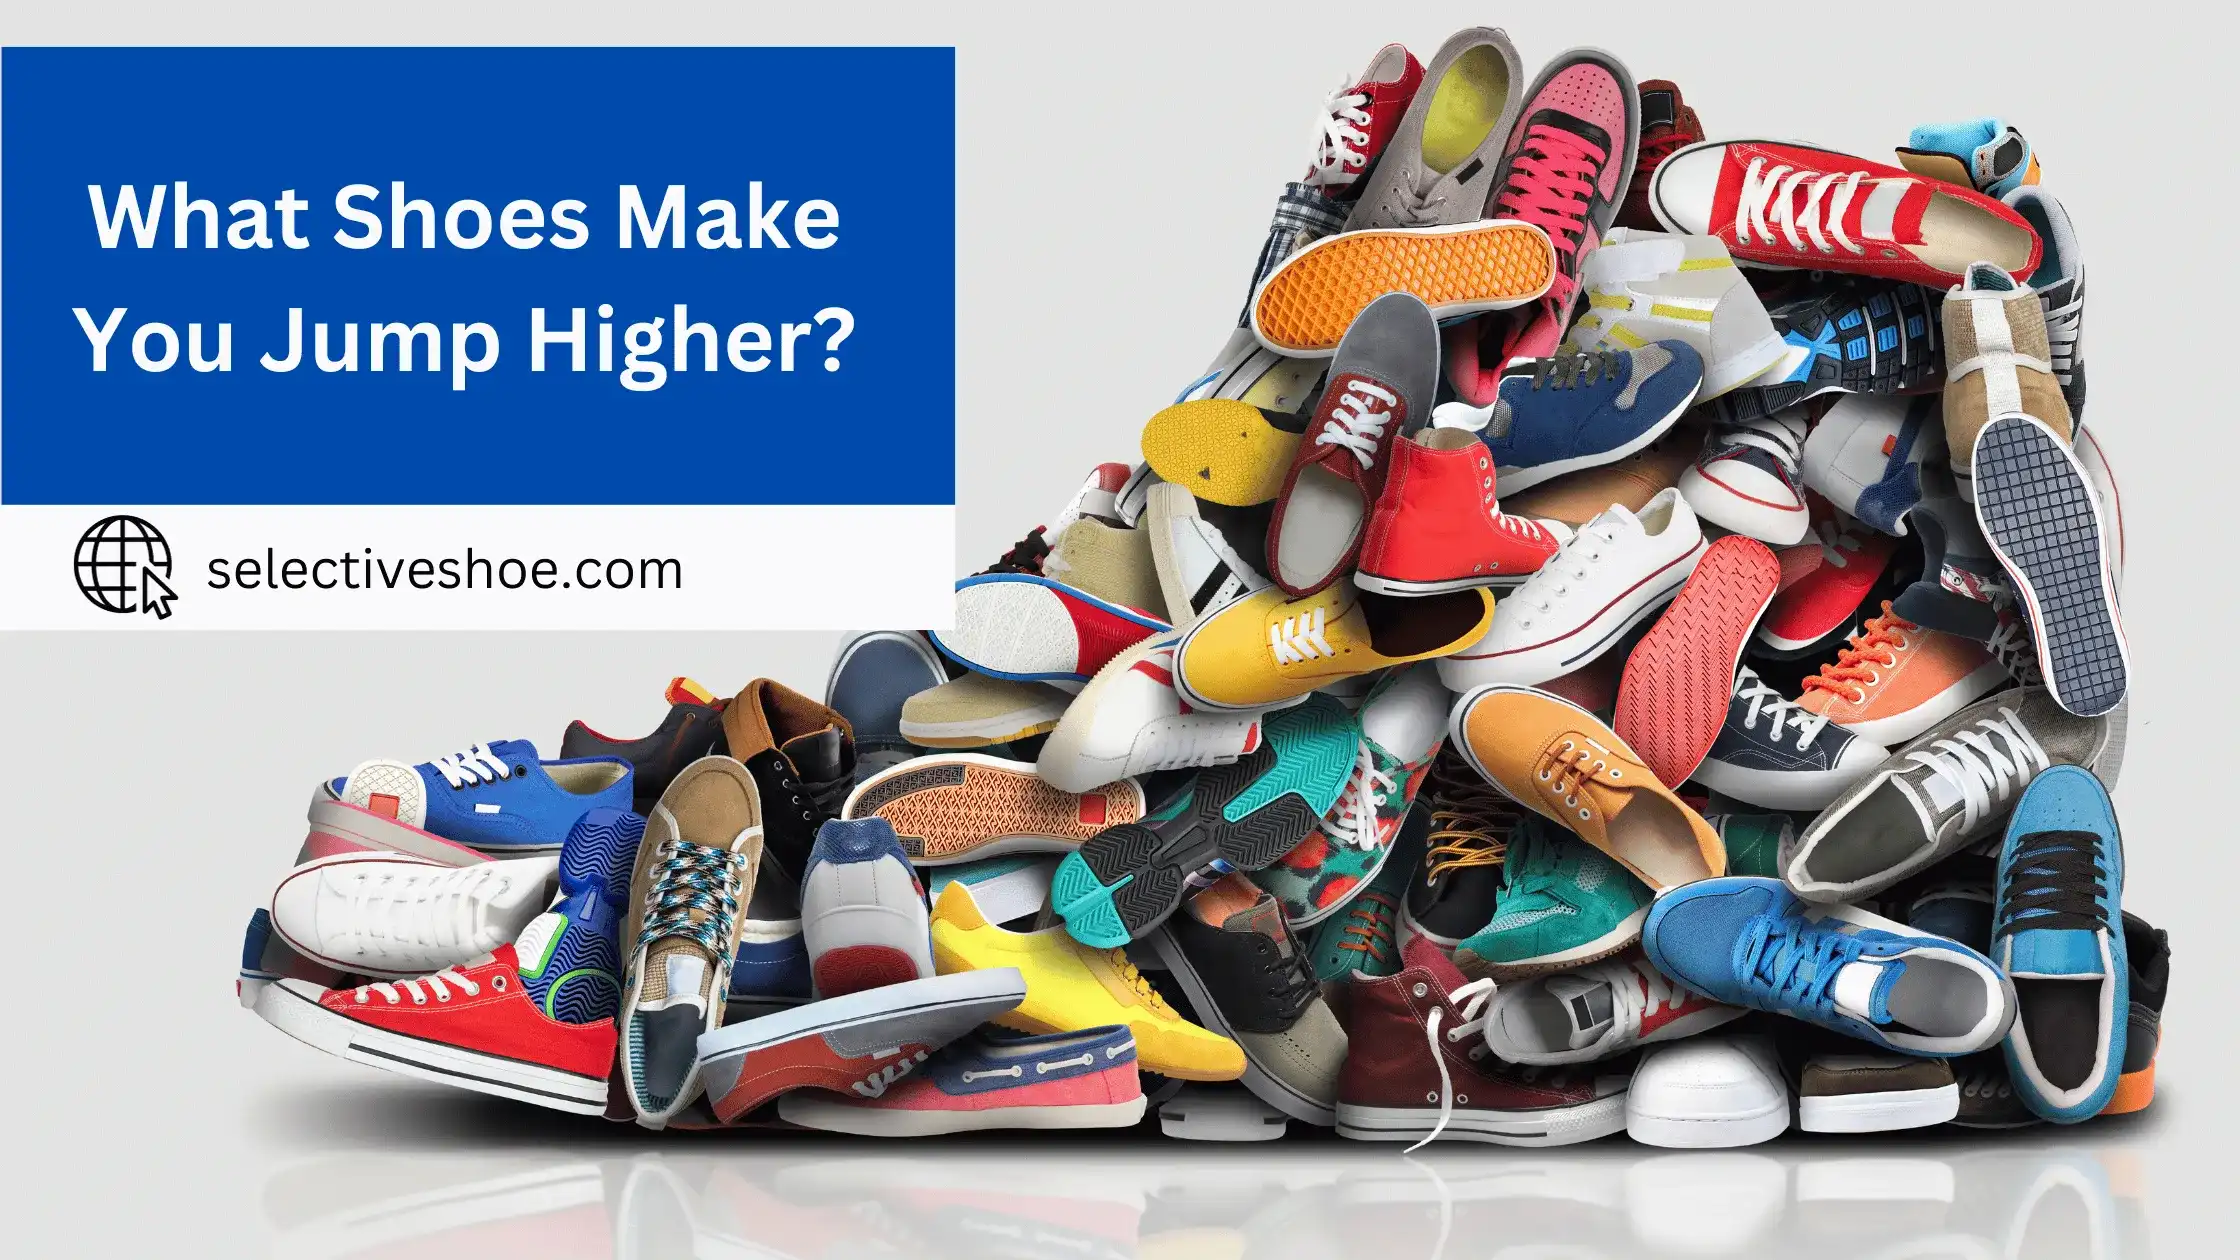 What Shoes Make You Jump Higher? A Detailed Analysis